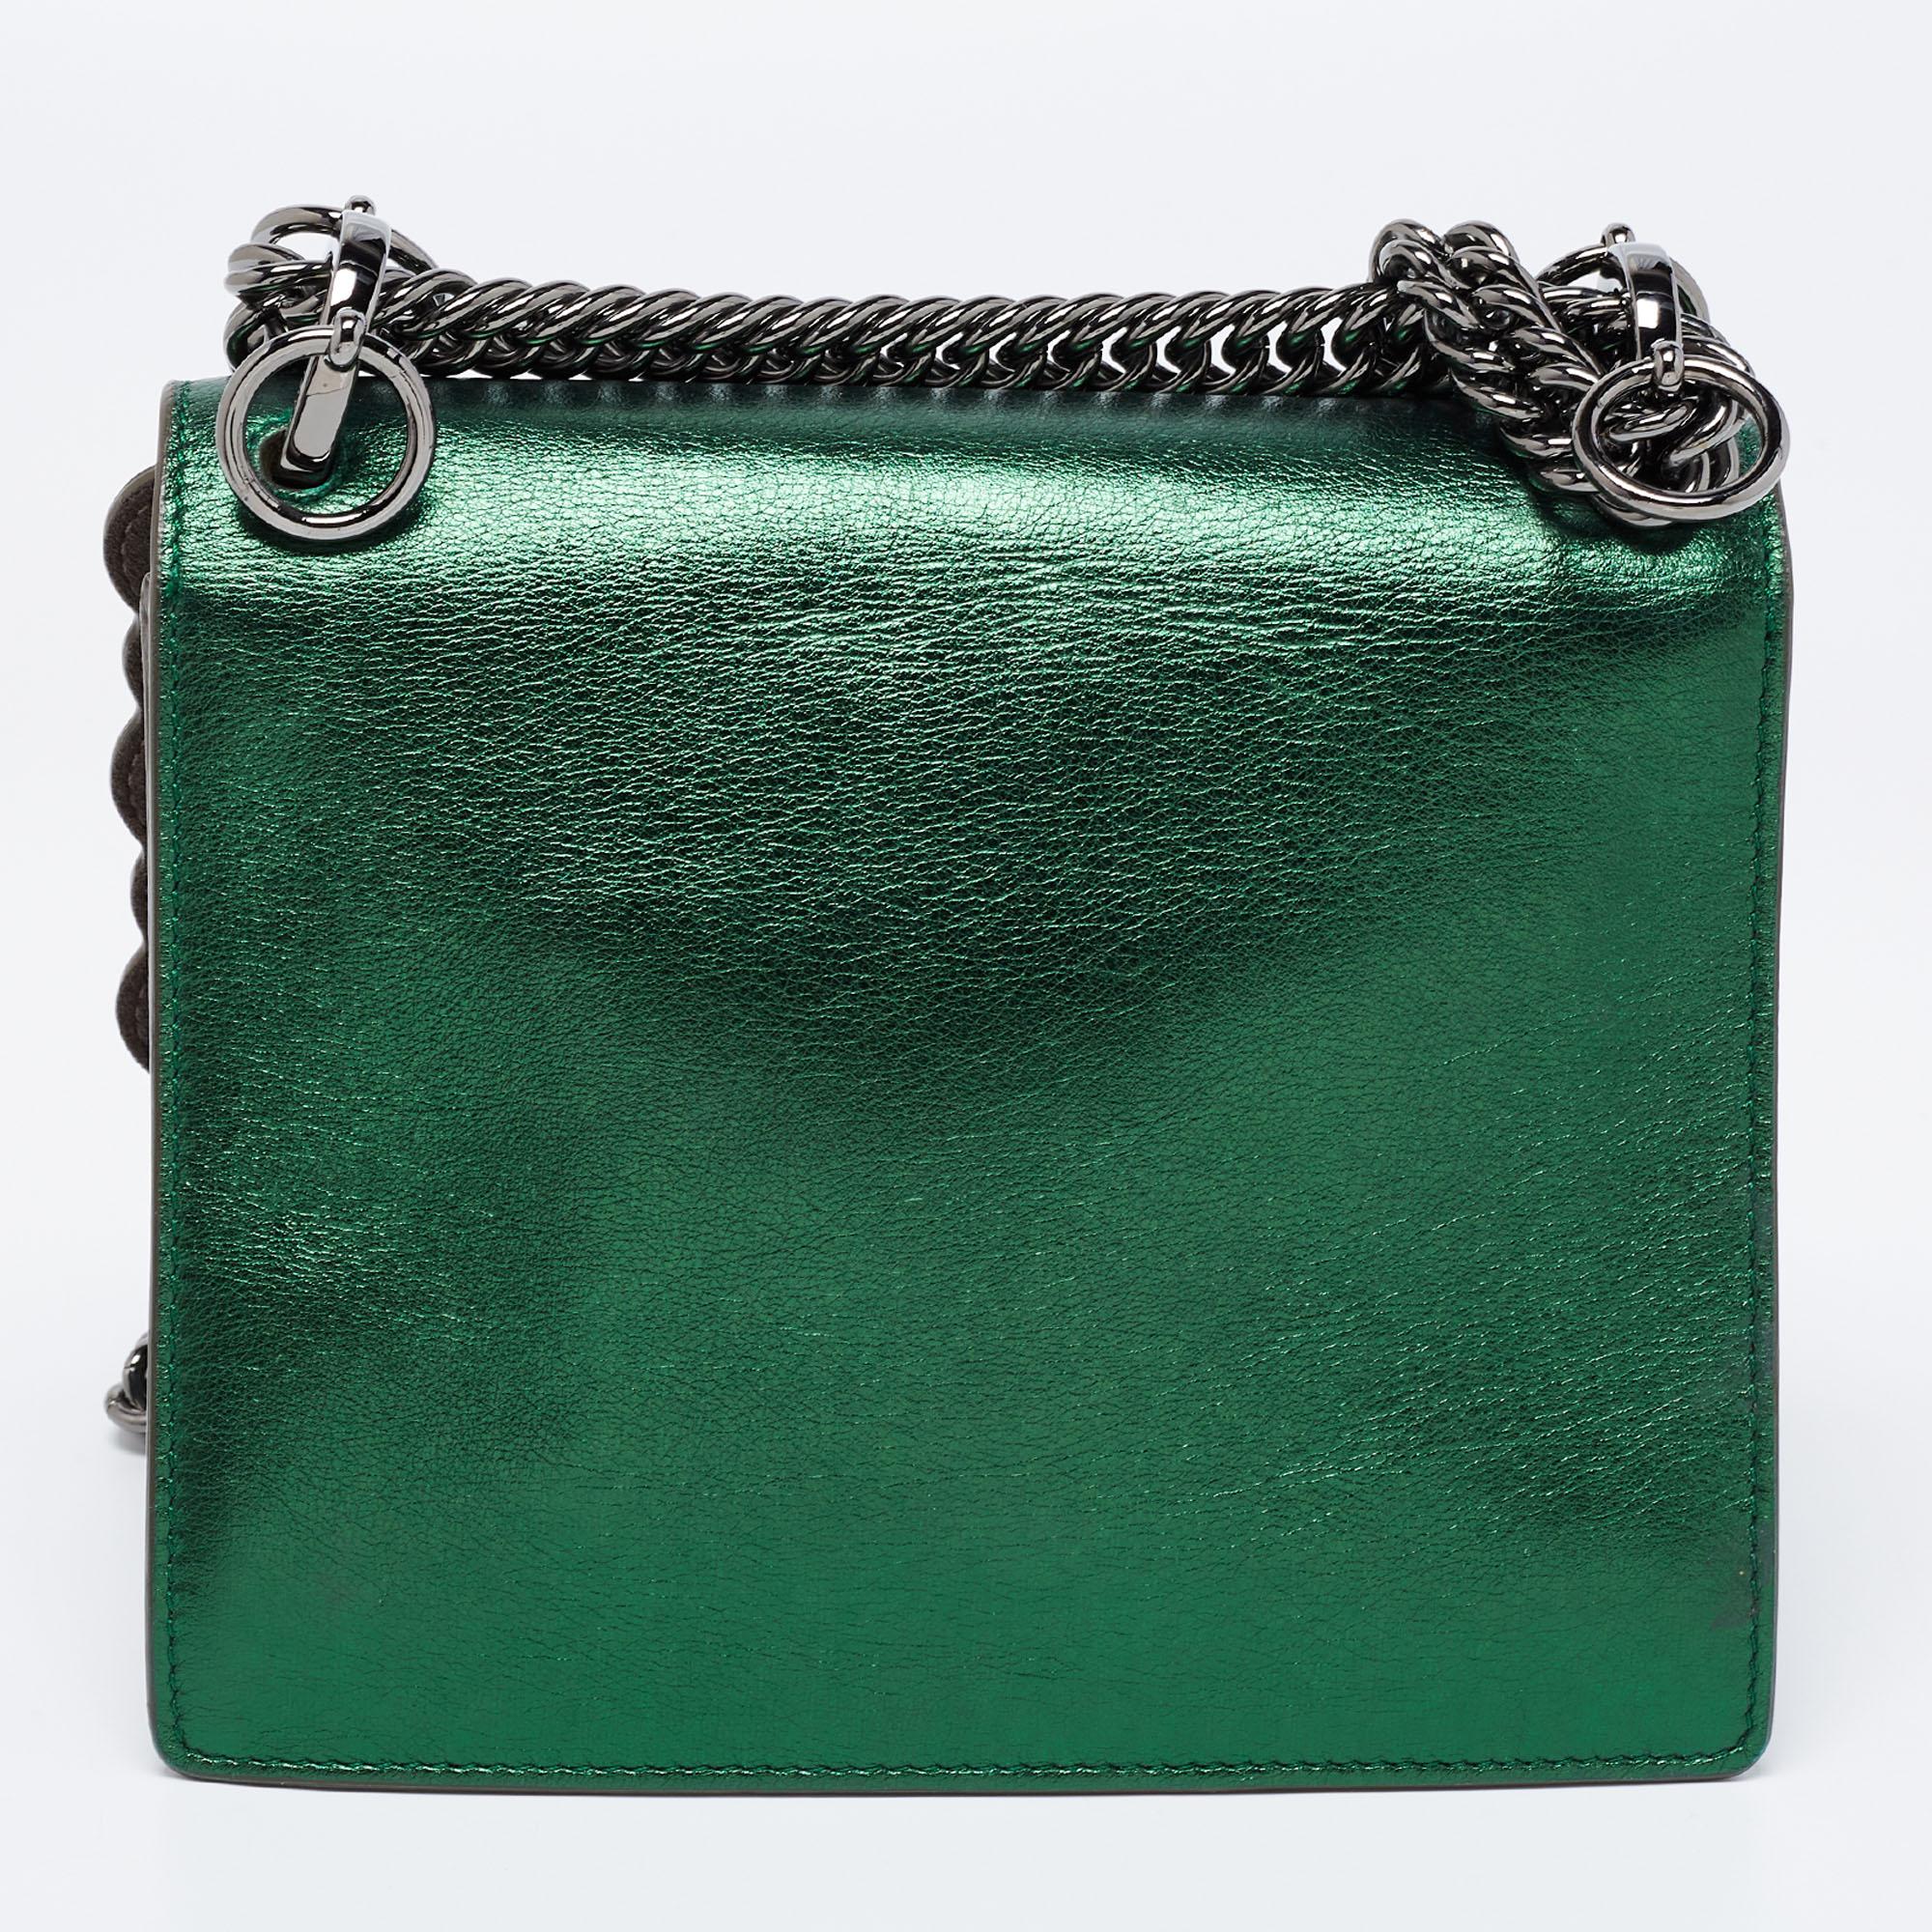 This Kan I Fendi bag exudes an aura of excellence and an unequaled standard of craftsmanship. It has been crafted from leather in a jade green shade and styled with studs and scalloped edges. It opens to a spacious suede-lined interior that can